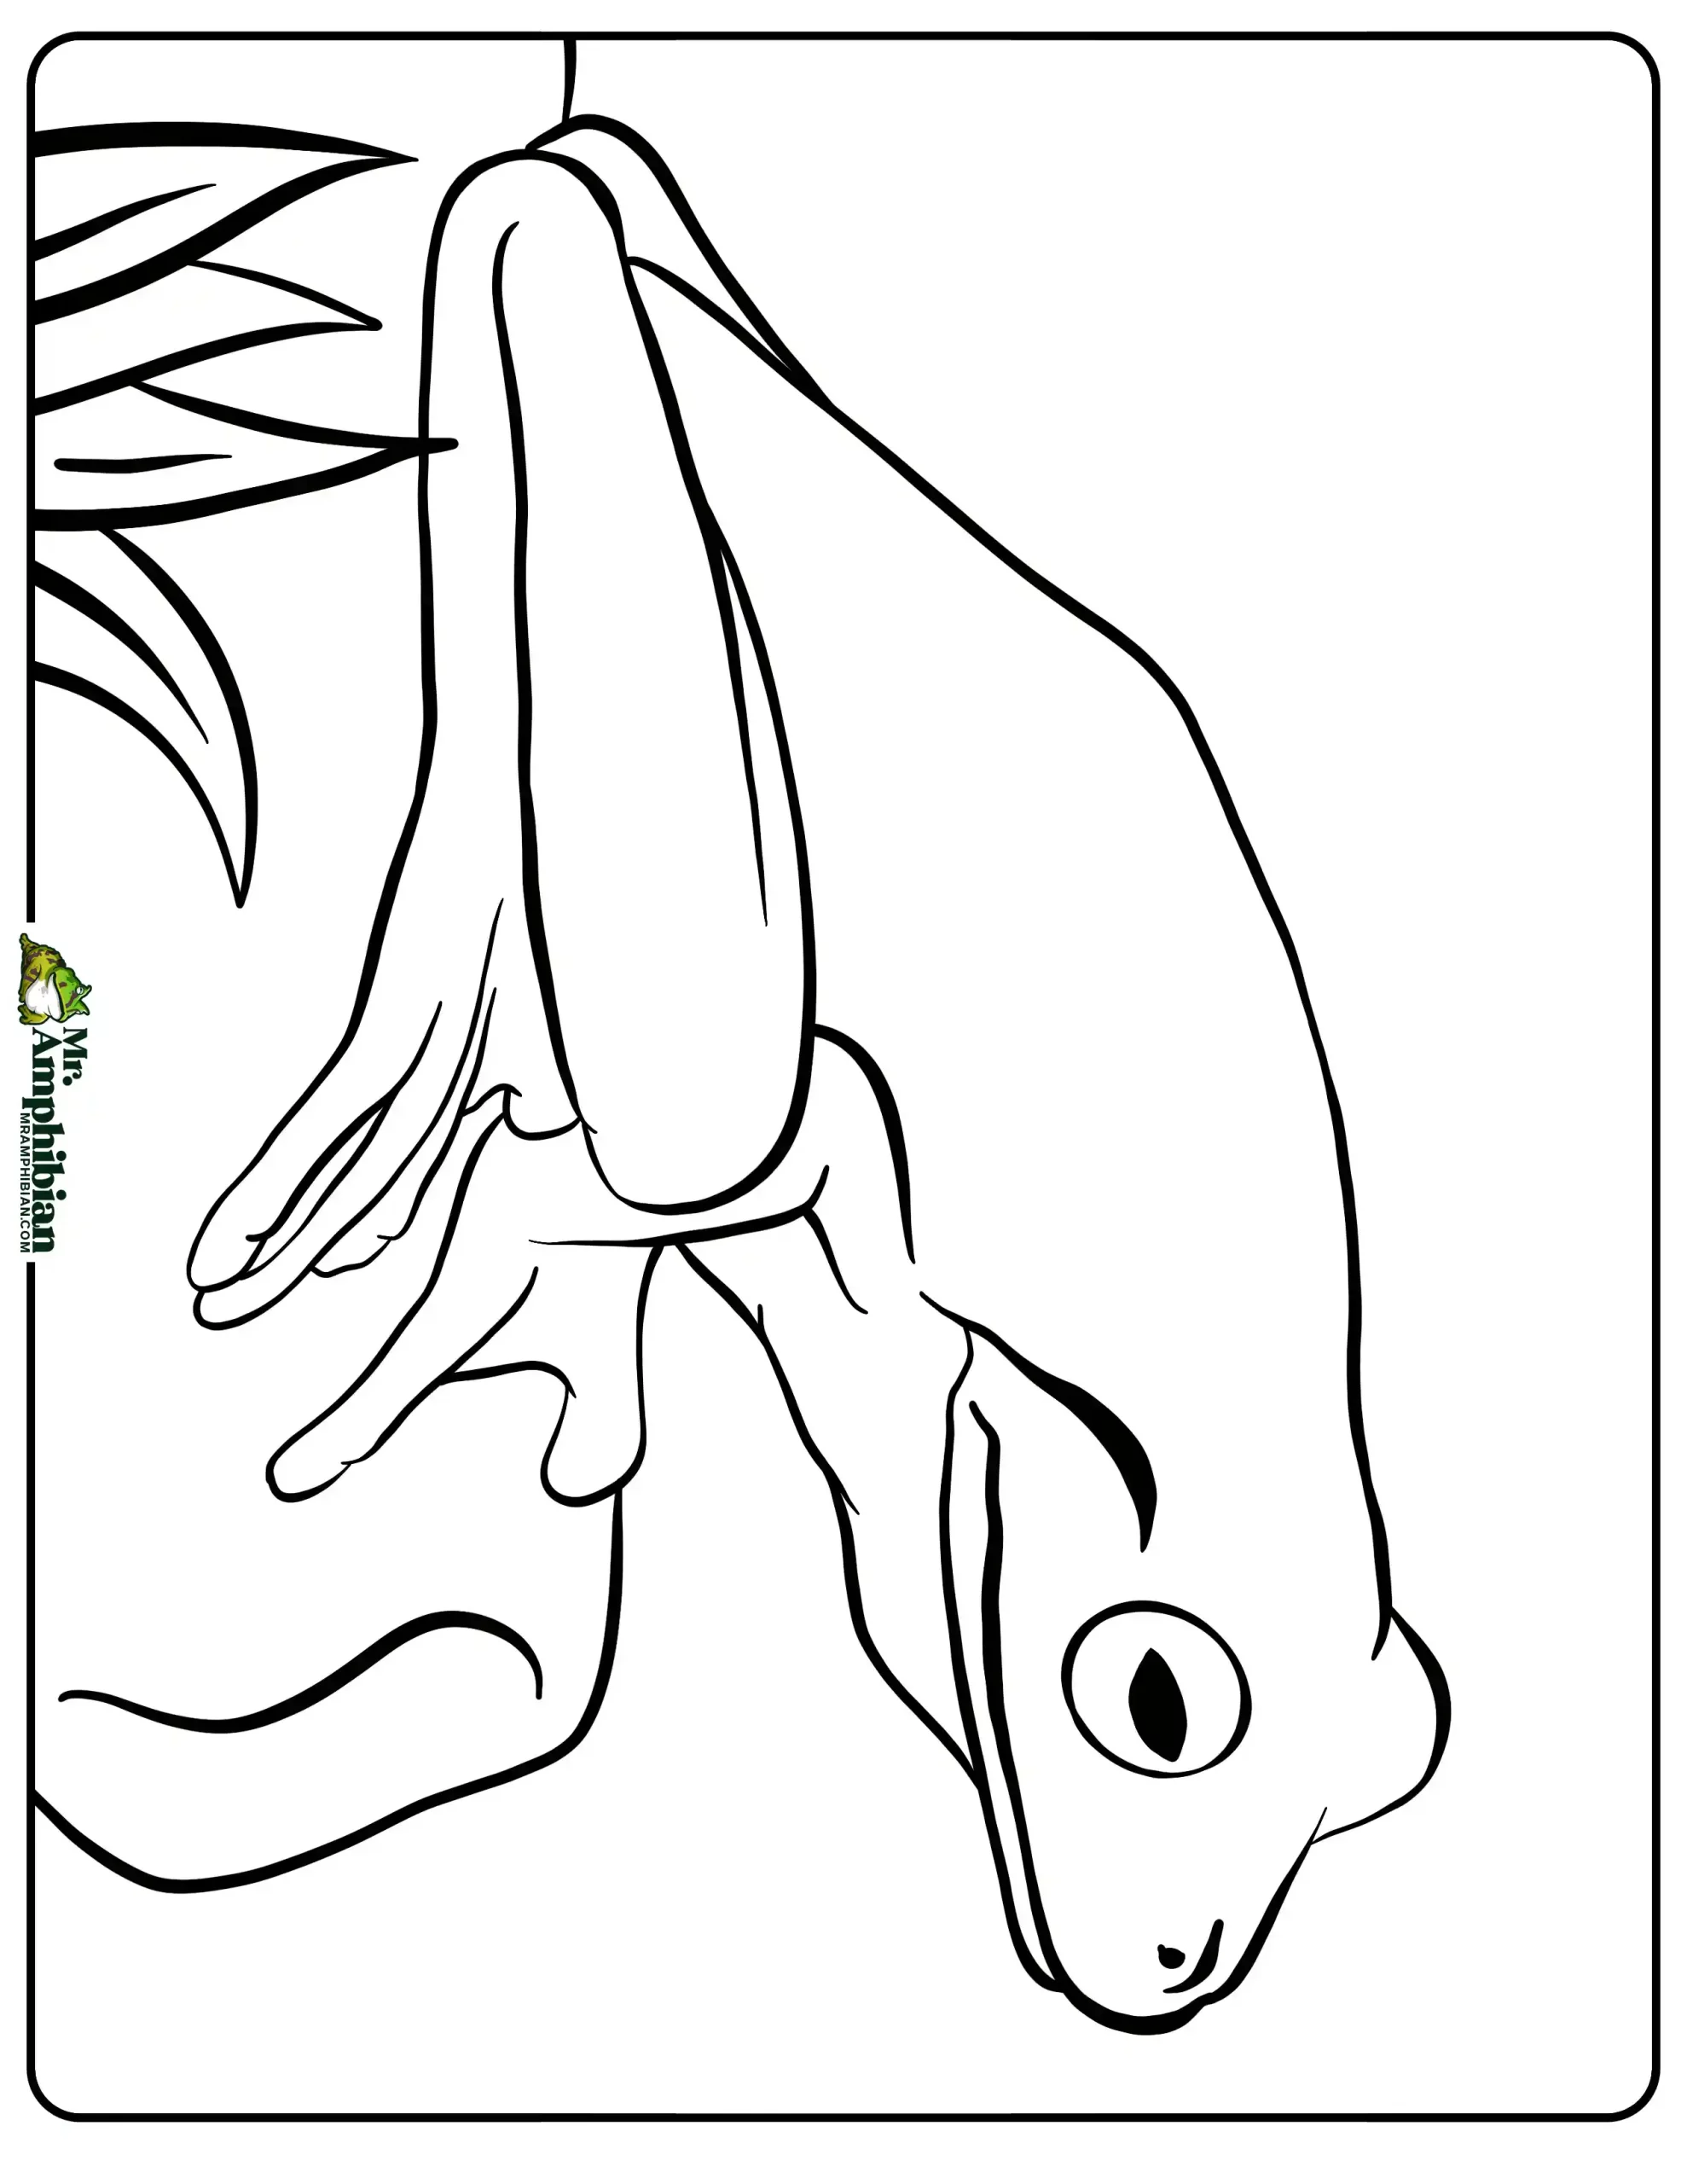 Tree Frog Coloring Page 02